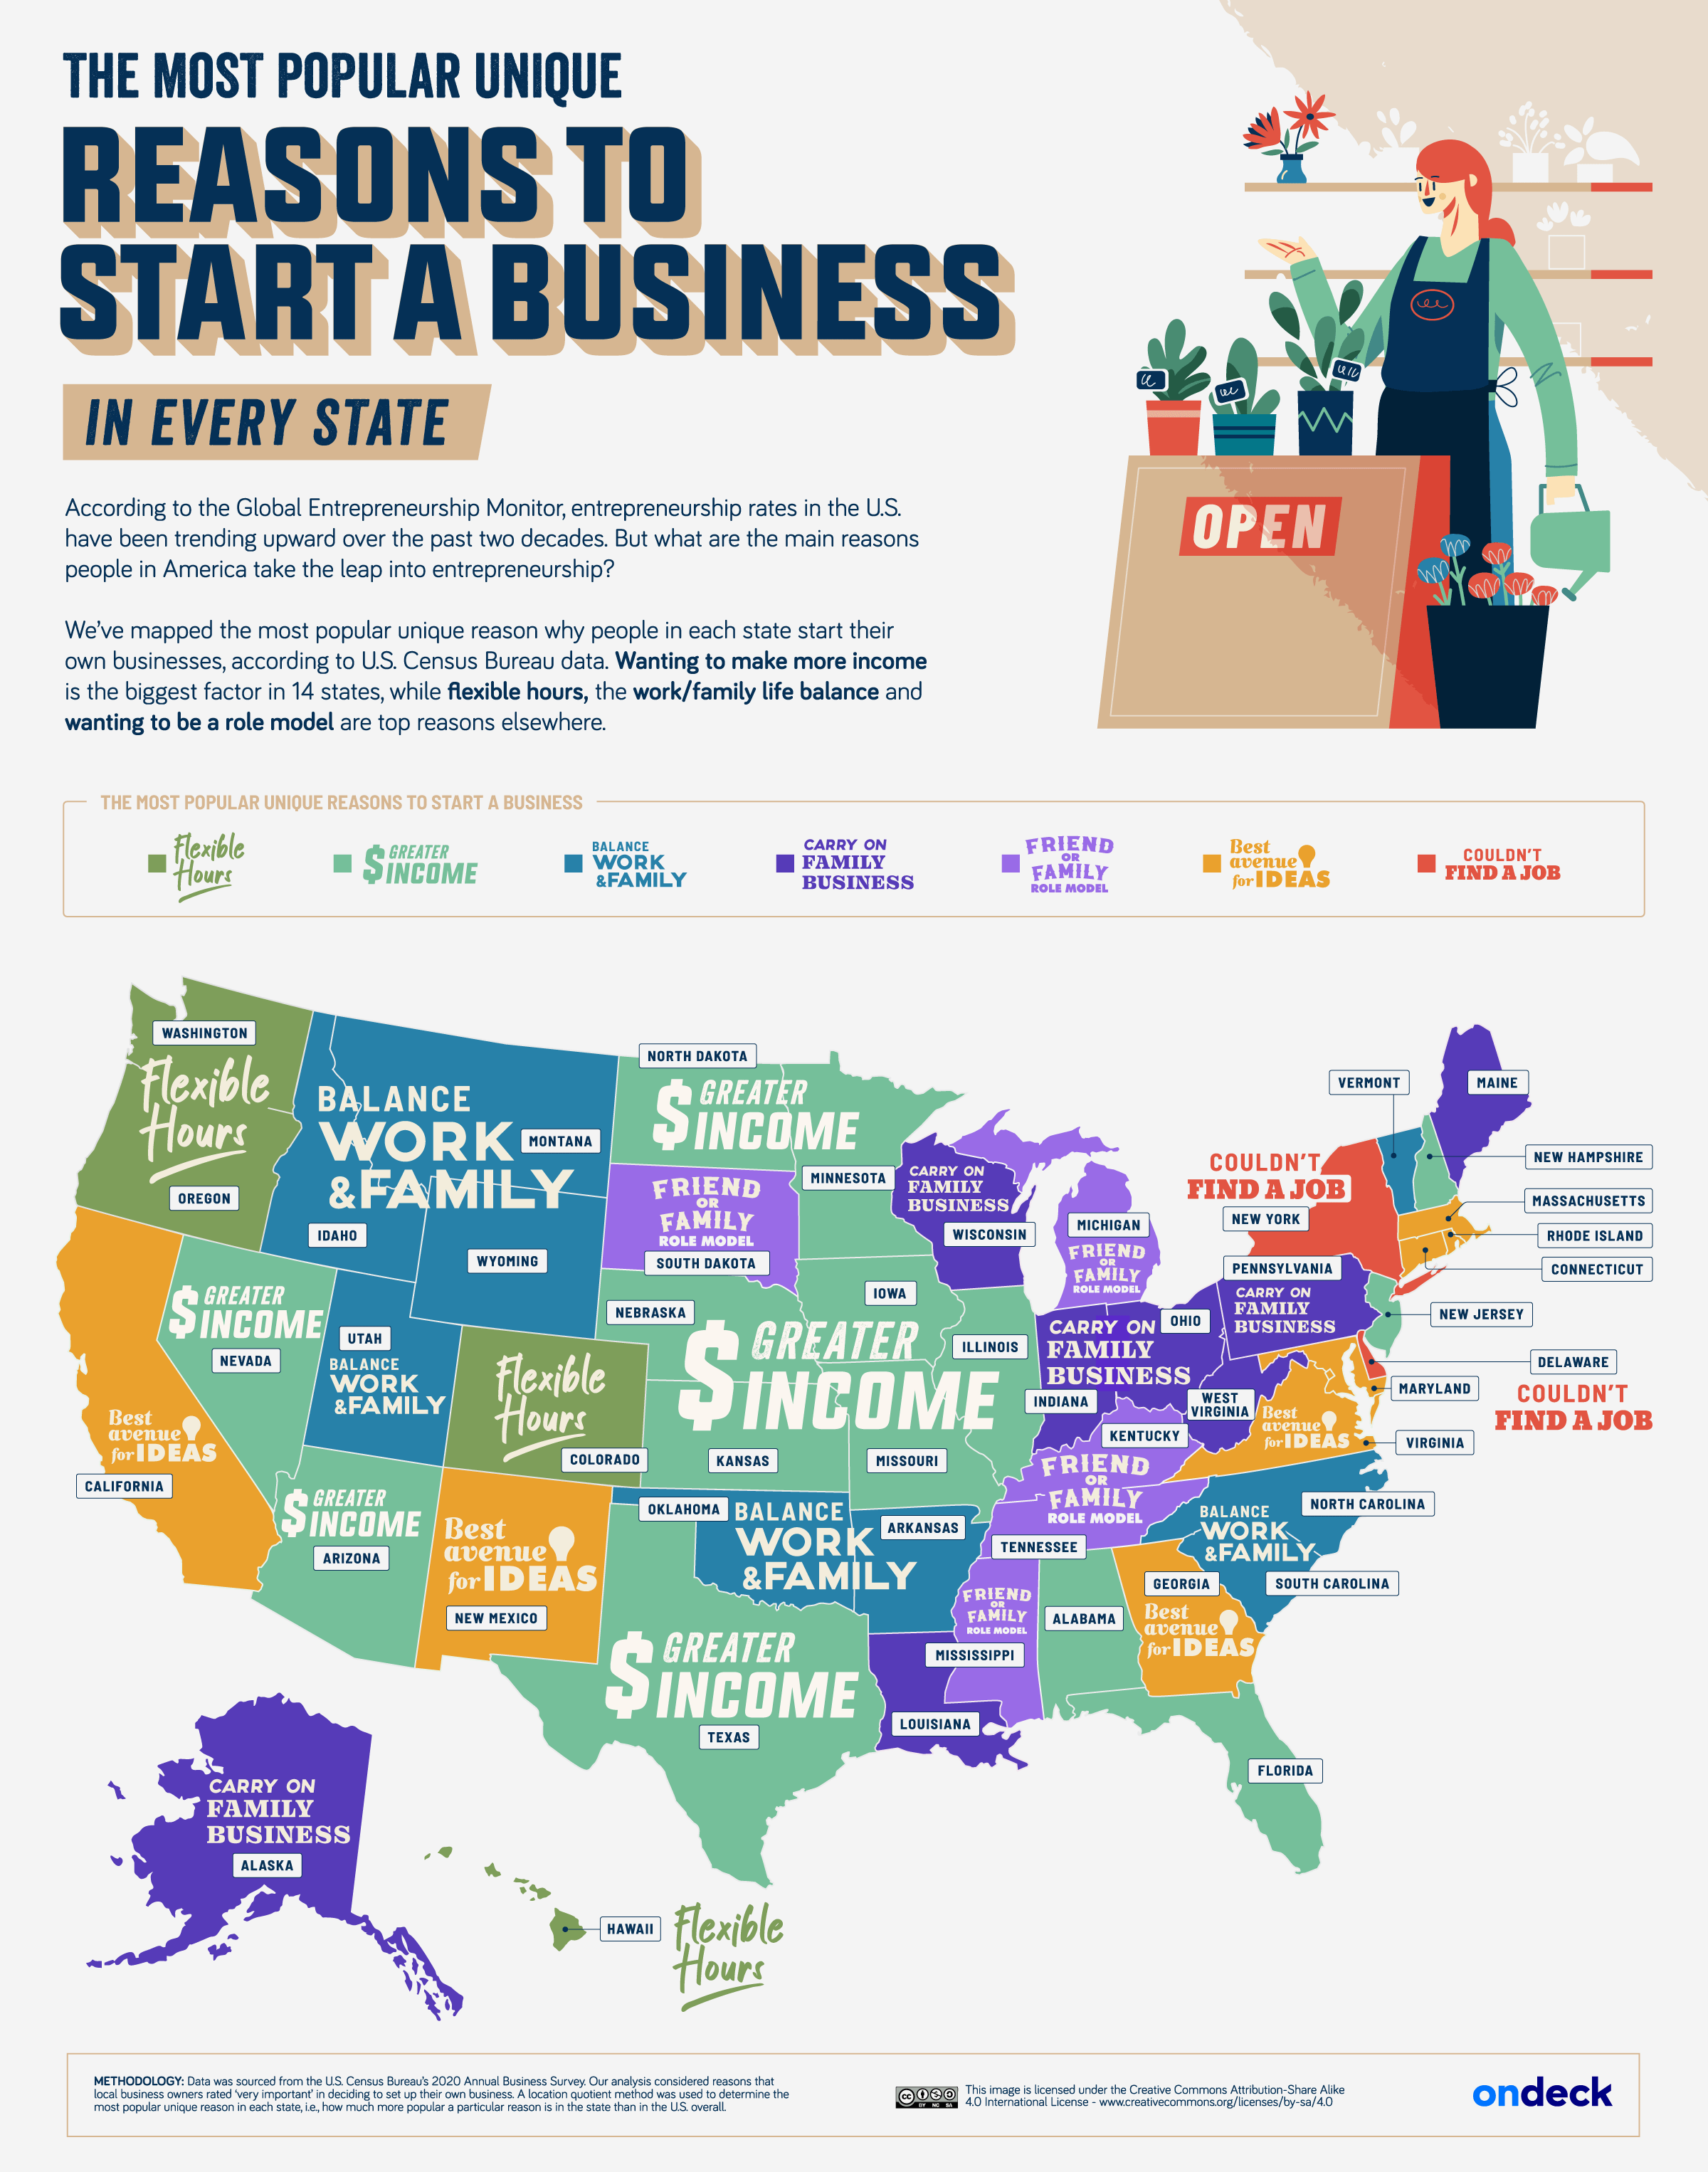 why do people start businesses in every U.S. state?